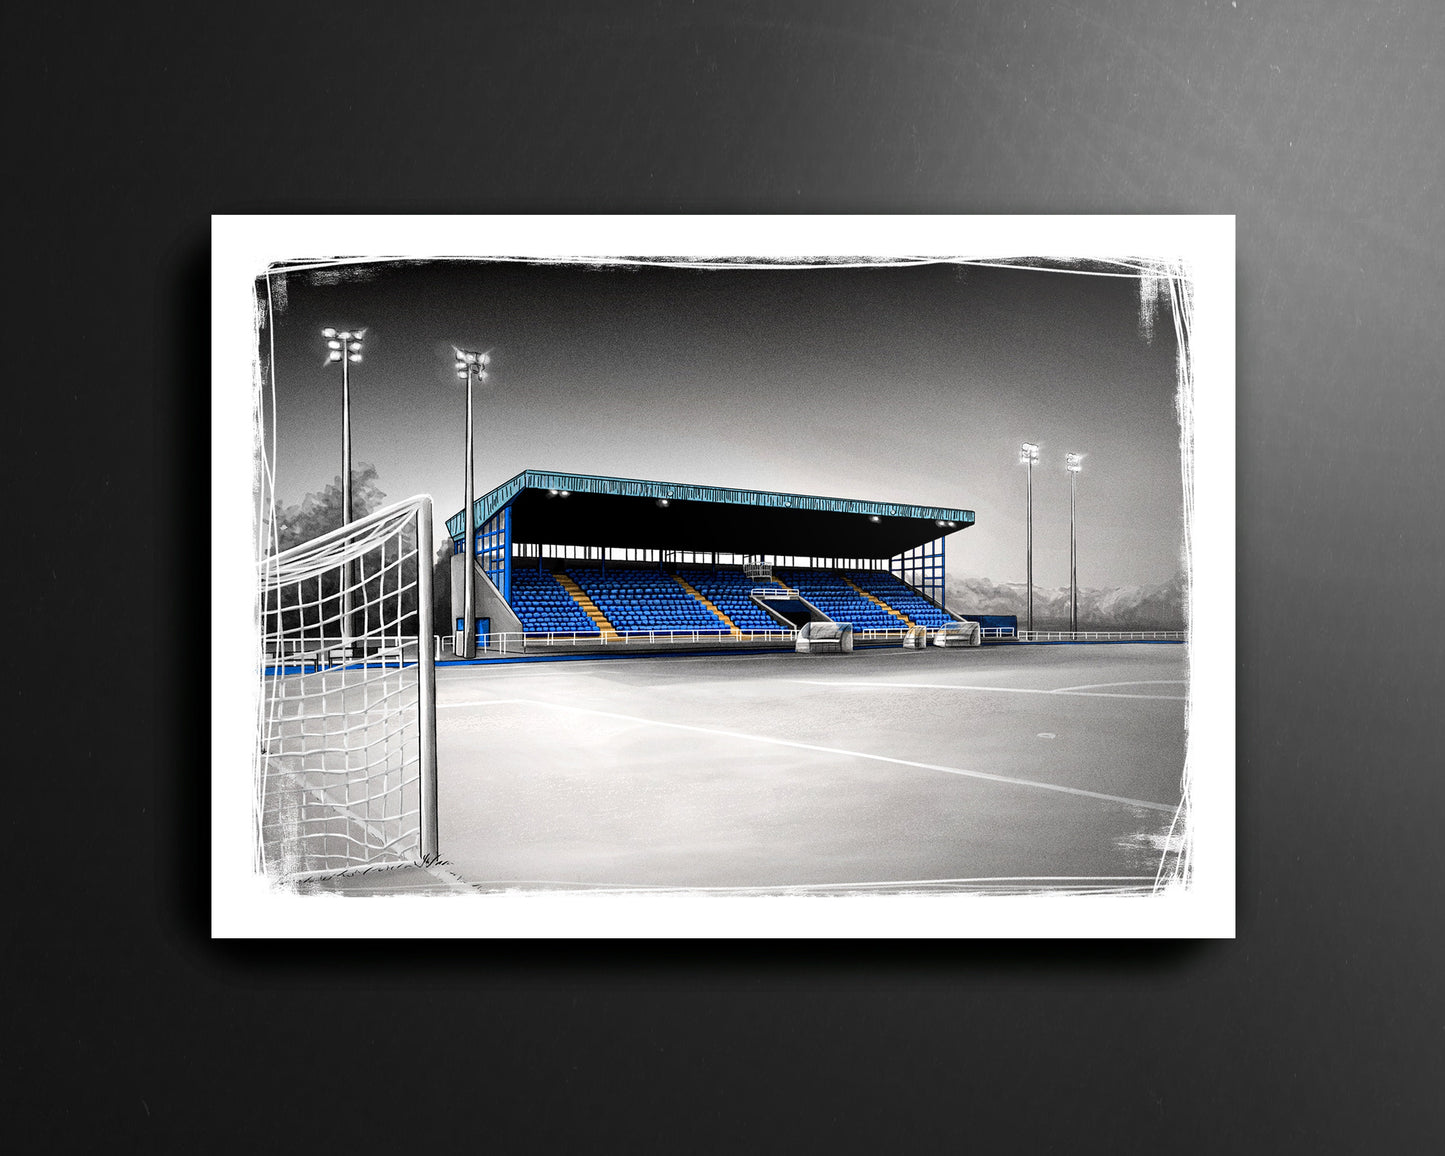 The RSC Waterford FC League of Ireland Football Print